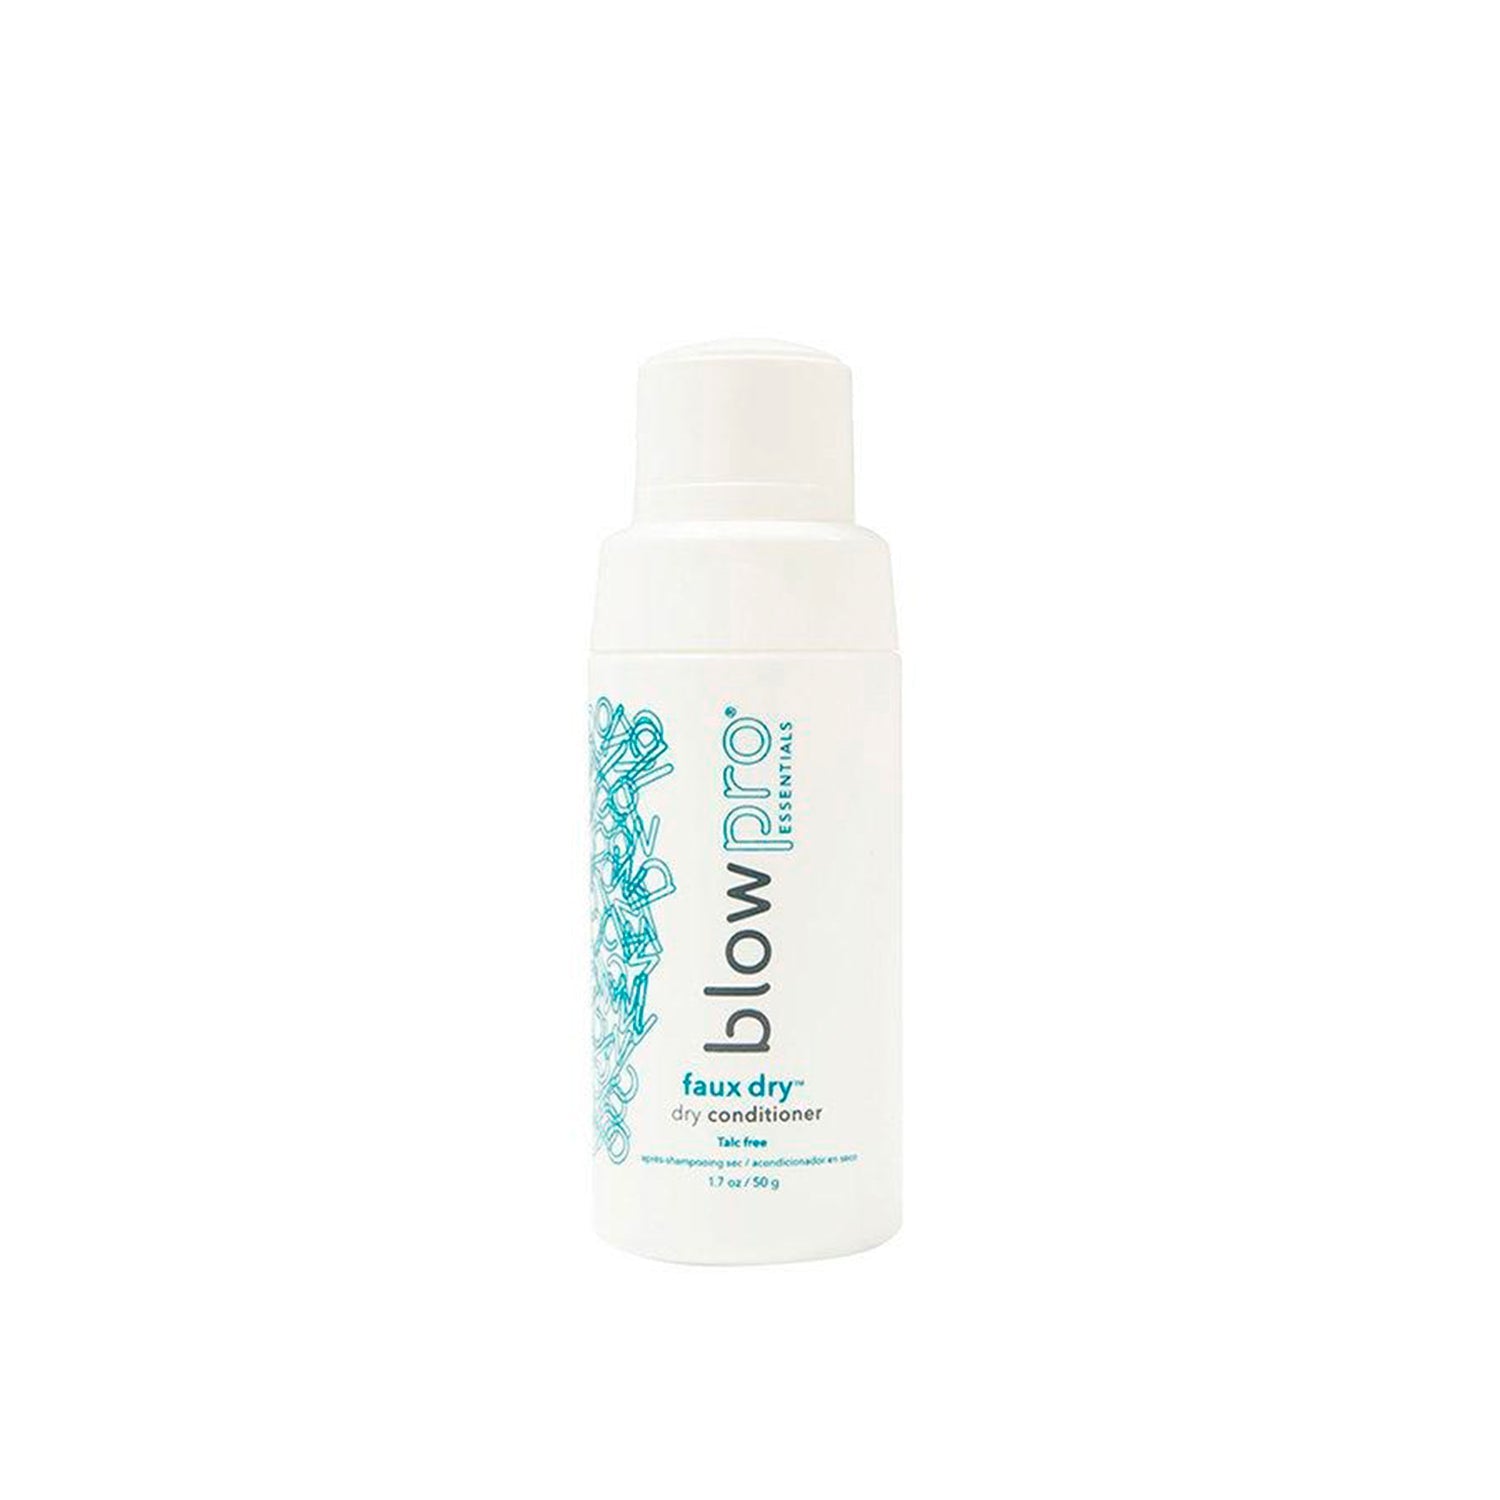 Blowpro Faux Dry Conditioner